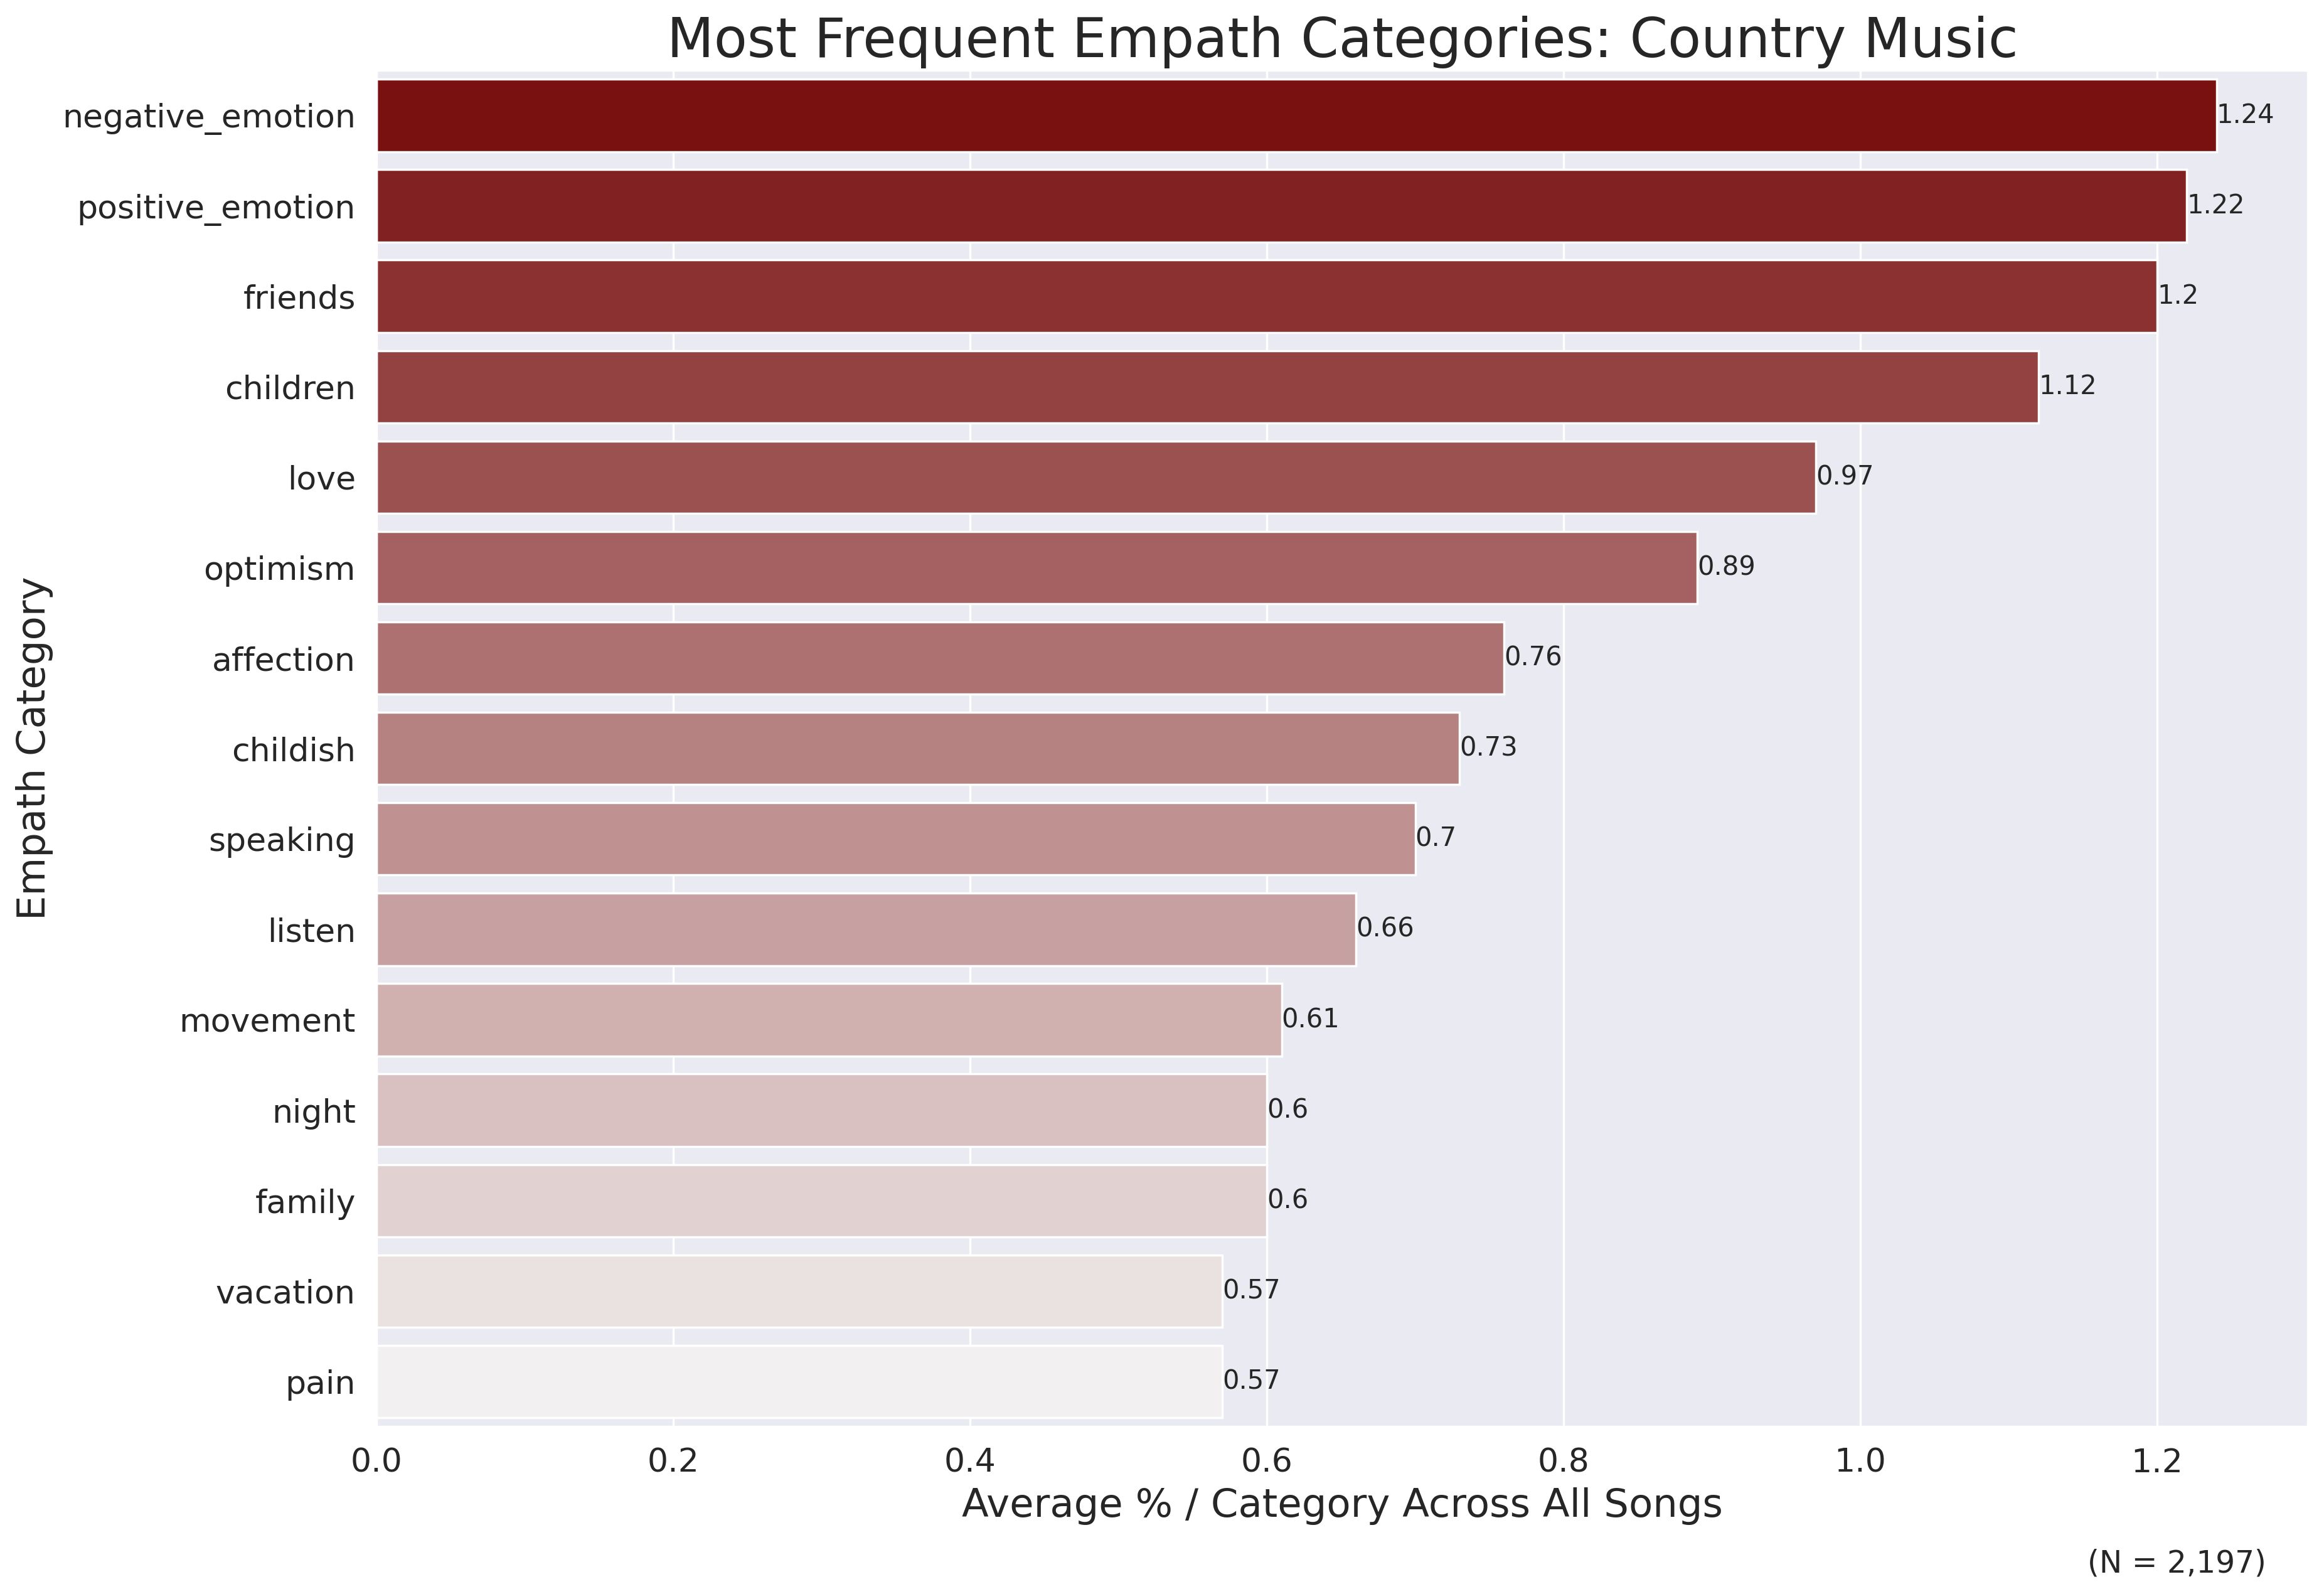 Country Top Empath Categories